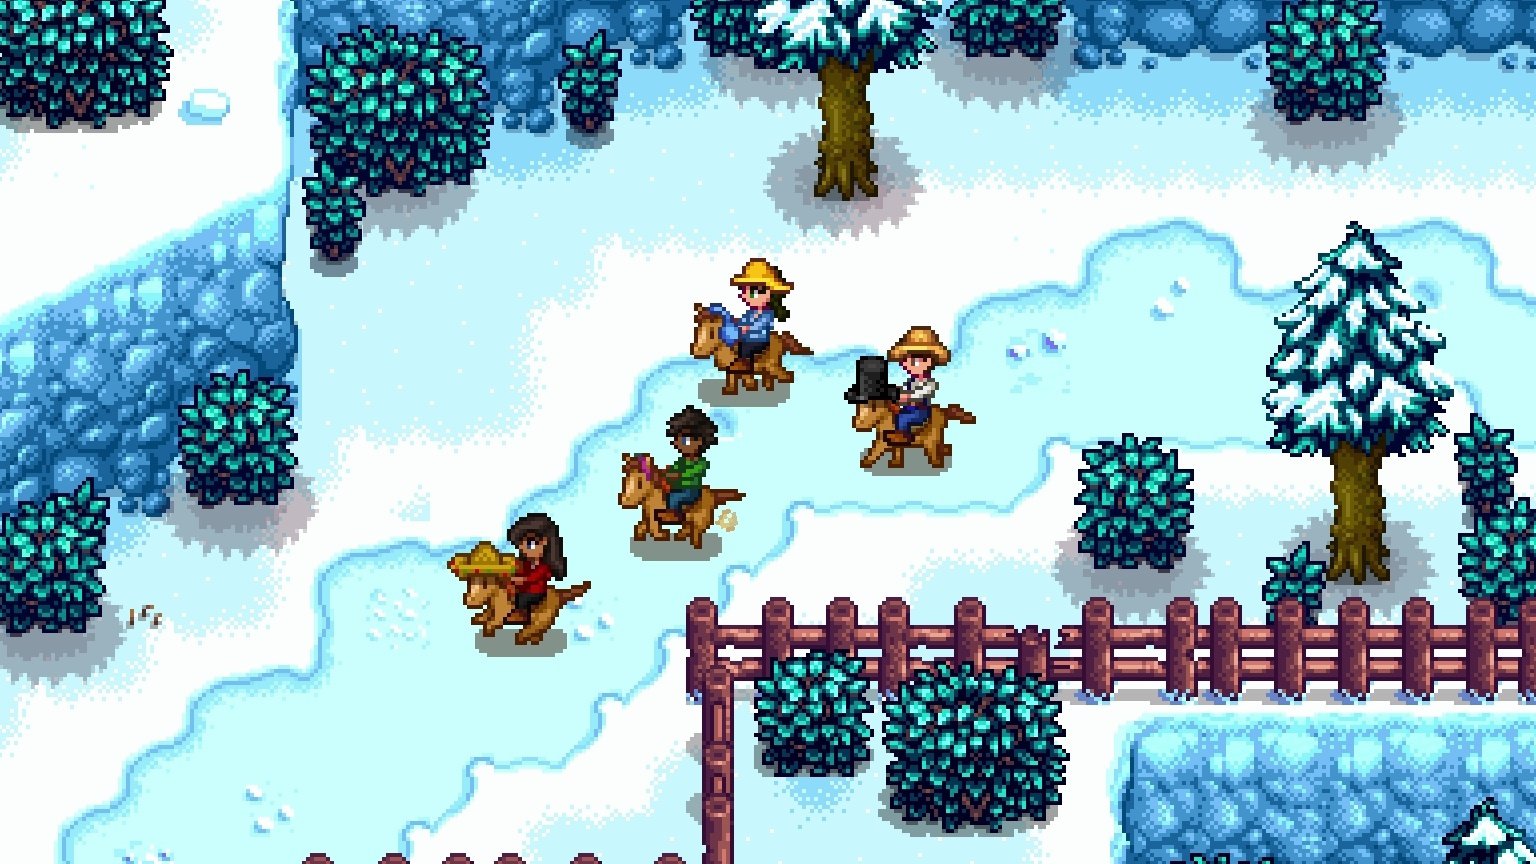 Stardew Valley Creator Outlines Next Update, Improves "Every Aspect" Of